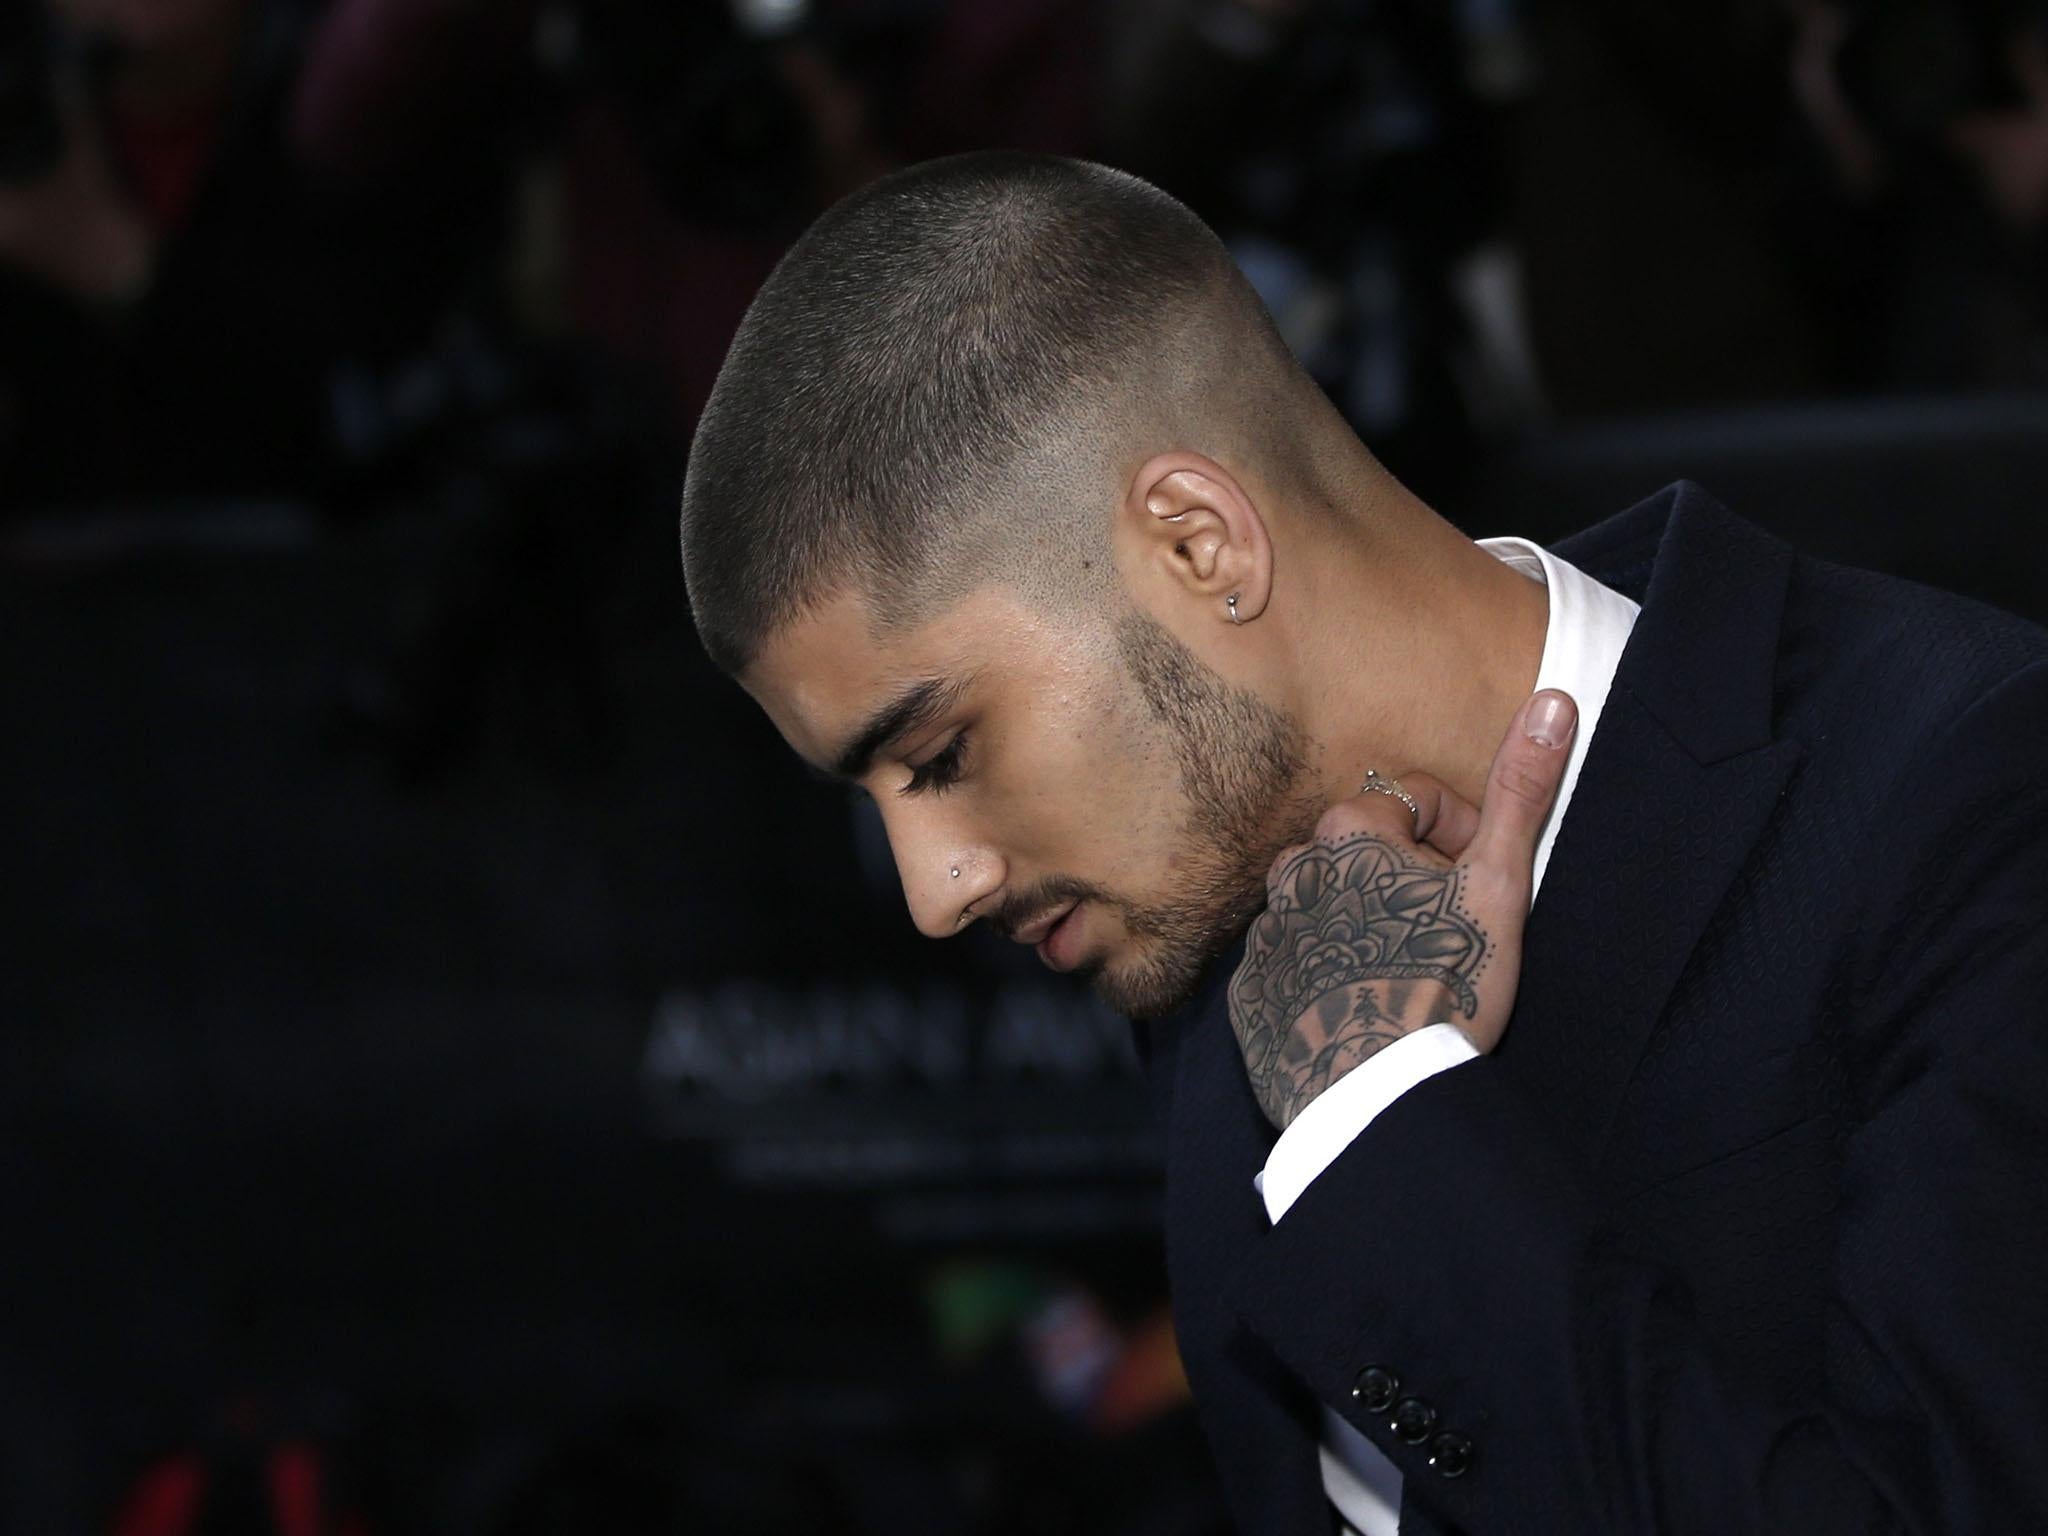 Zayn Malik Says His 'Foot Is Fine' After It Was Run Over by Car in Paris:  'Incredibly Well Made Shoes'